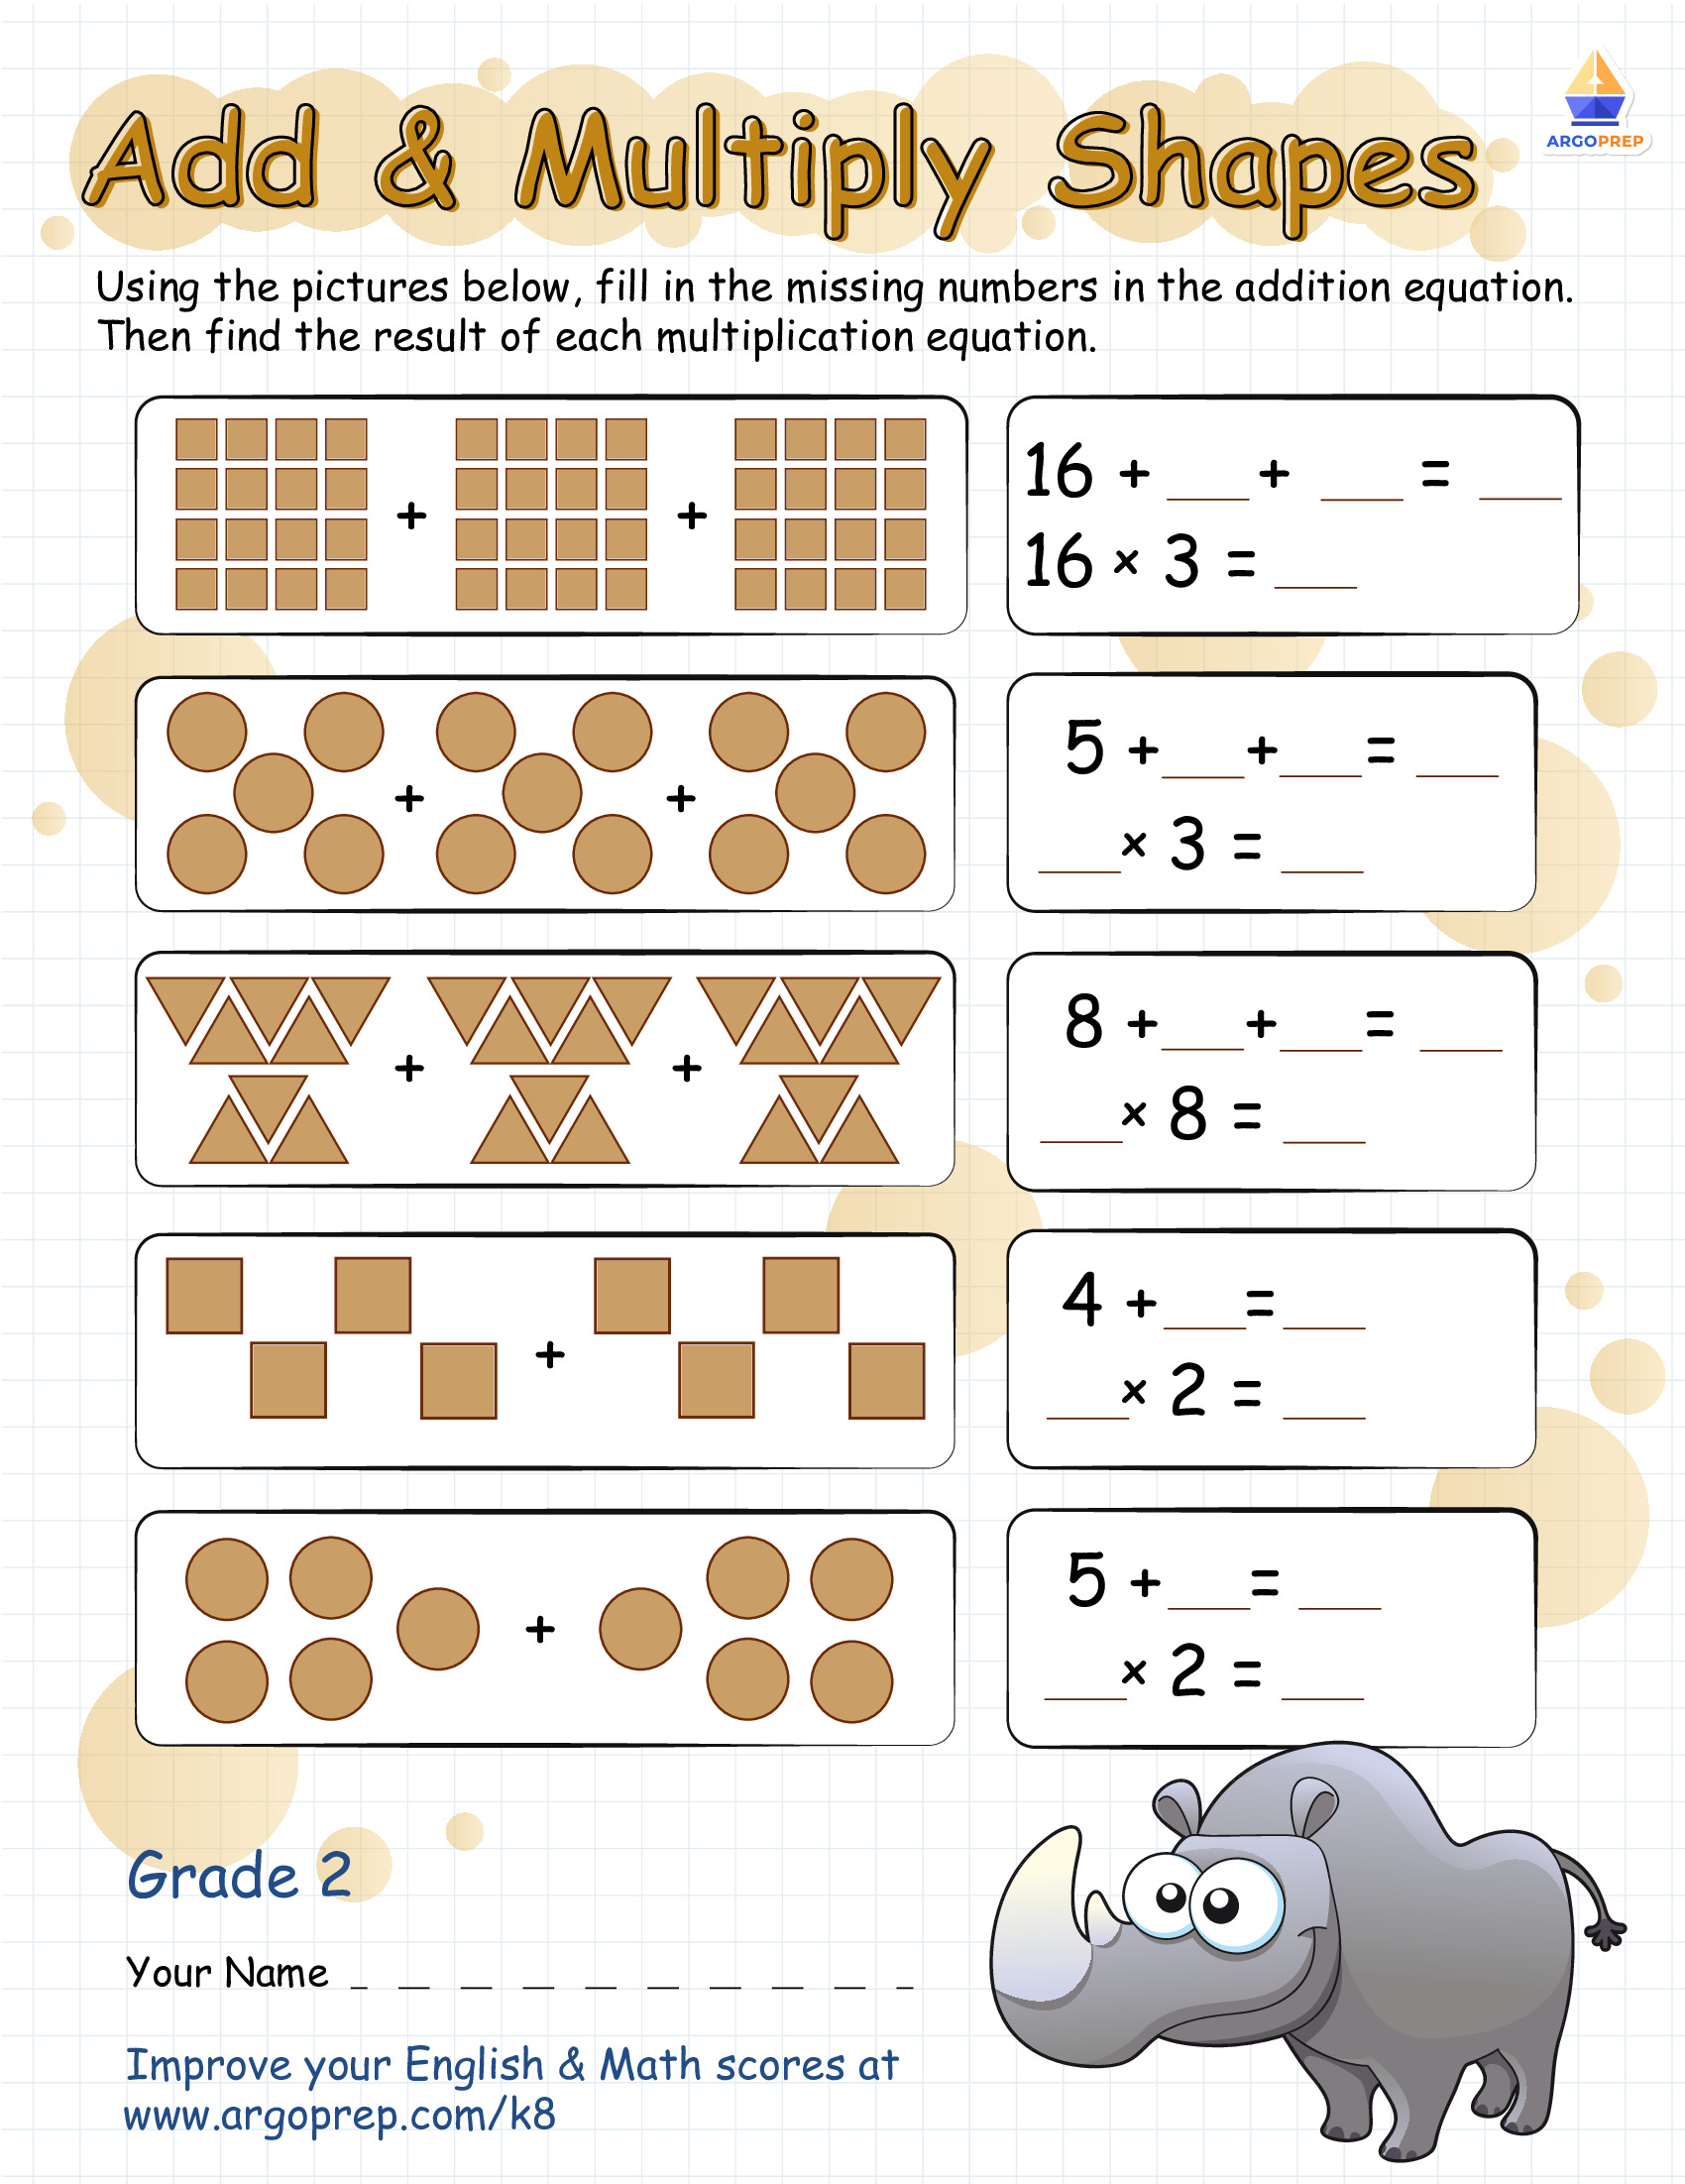 repeated-addition-worksheet-2nd-grade-math-worksheets-printable